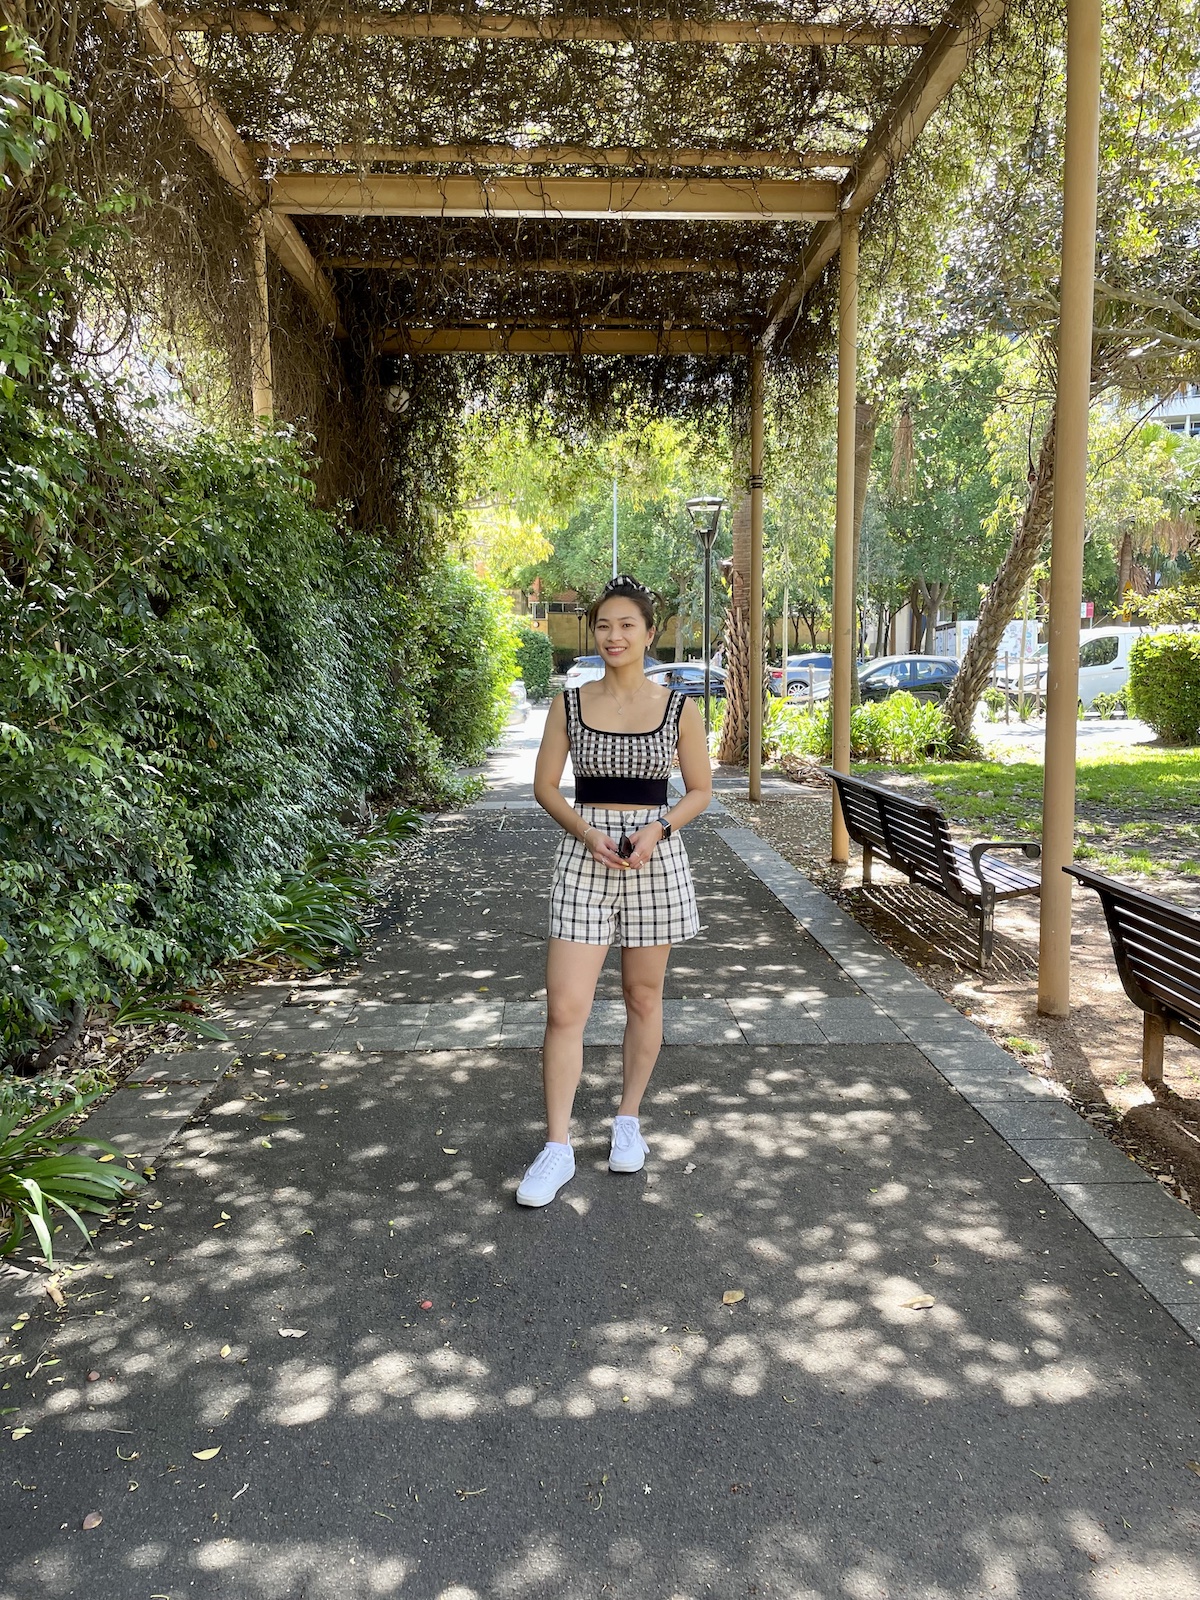 Image 1: An Asian woman with dark hair in a bun. She is standing under a sheltered path with vines and leaves growing over the wooden shelter. She is wearing a checkered top with black piping detail, white shorts with a black checkered pattern, and white sneakers. On the right are wooden park benches and on the left is green bush.